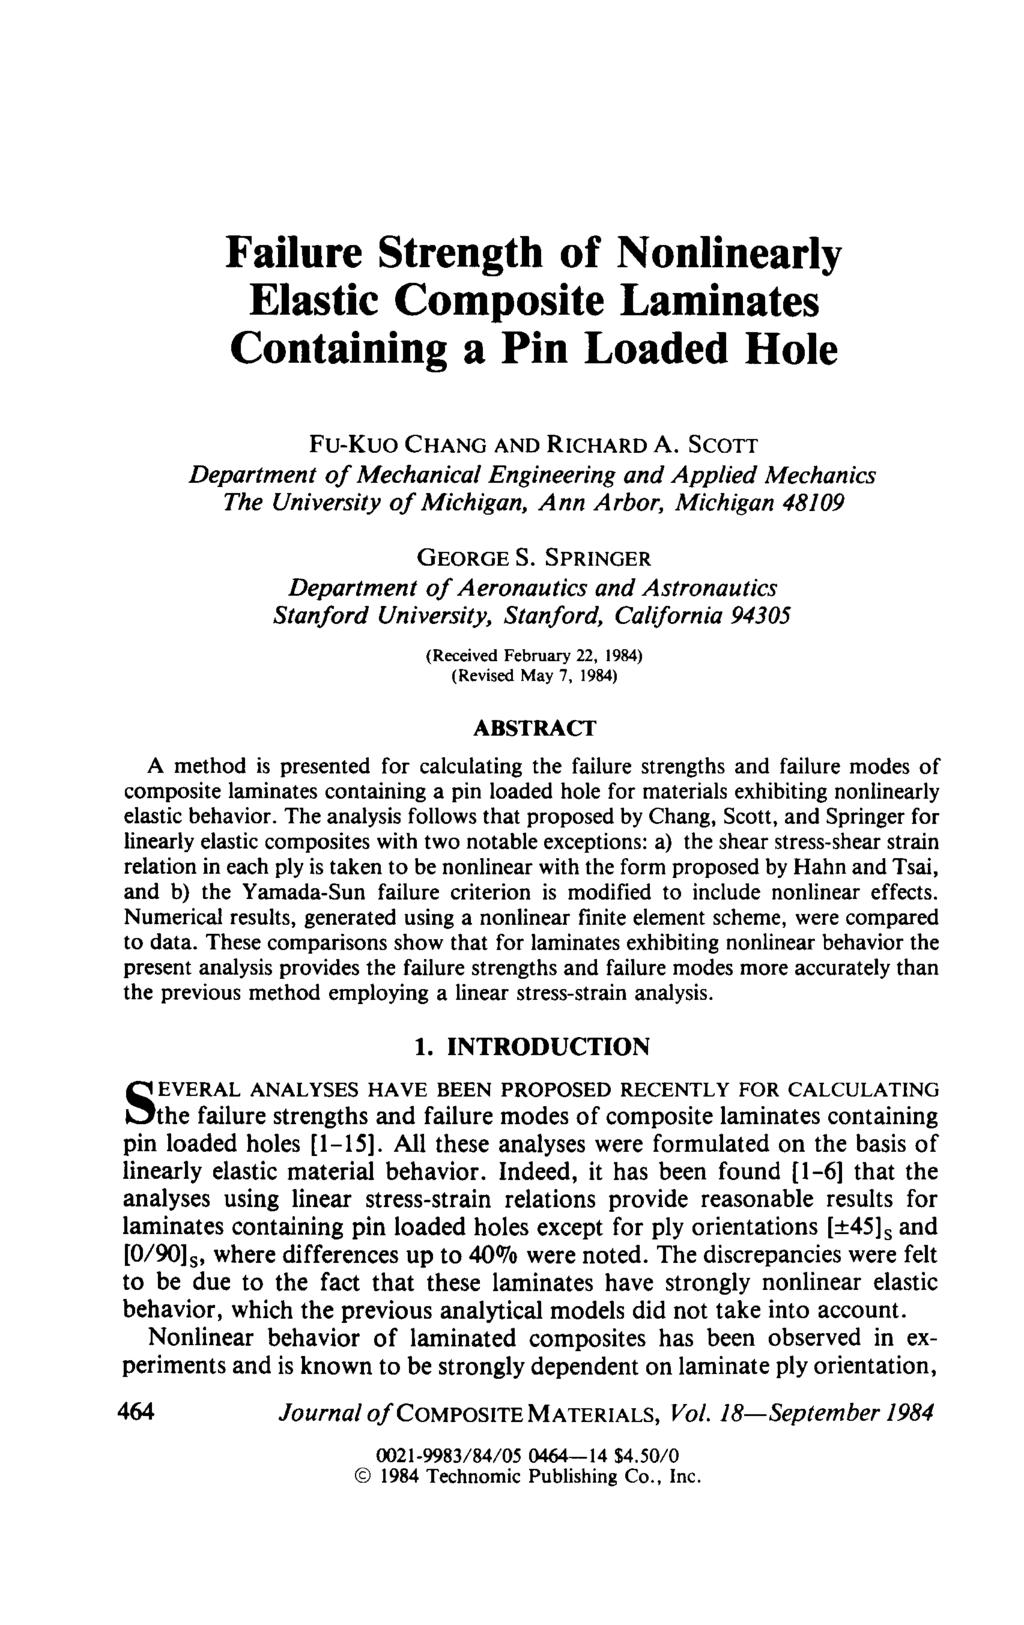 464 Failure Strength of Nonlinearly Elastic Composite Laminates Containing a Pin Loaded Hole FU-KUO CHANG AND RICHARD A.